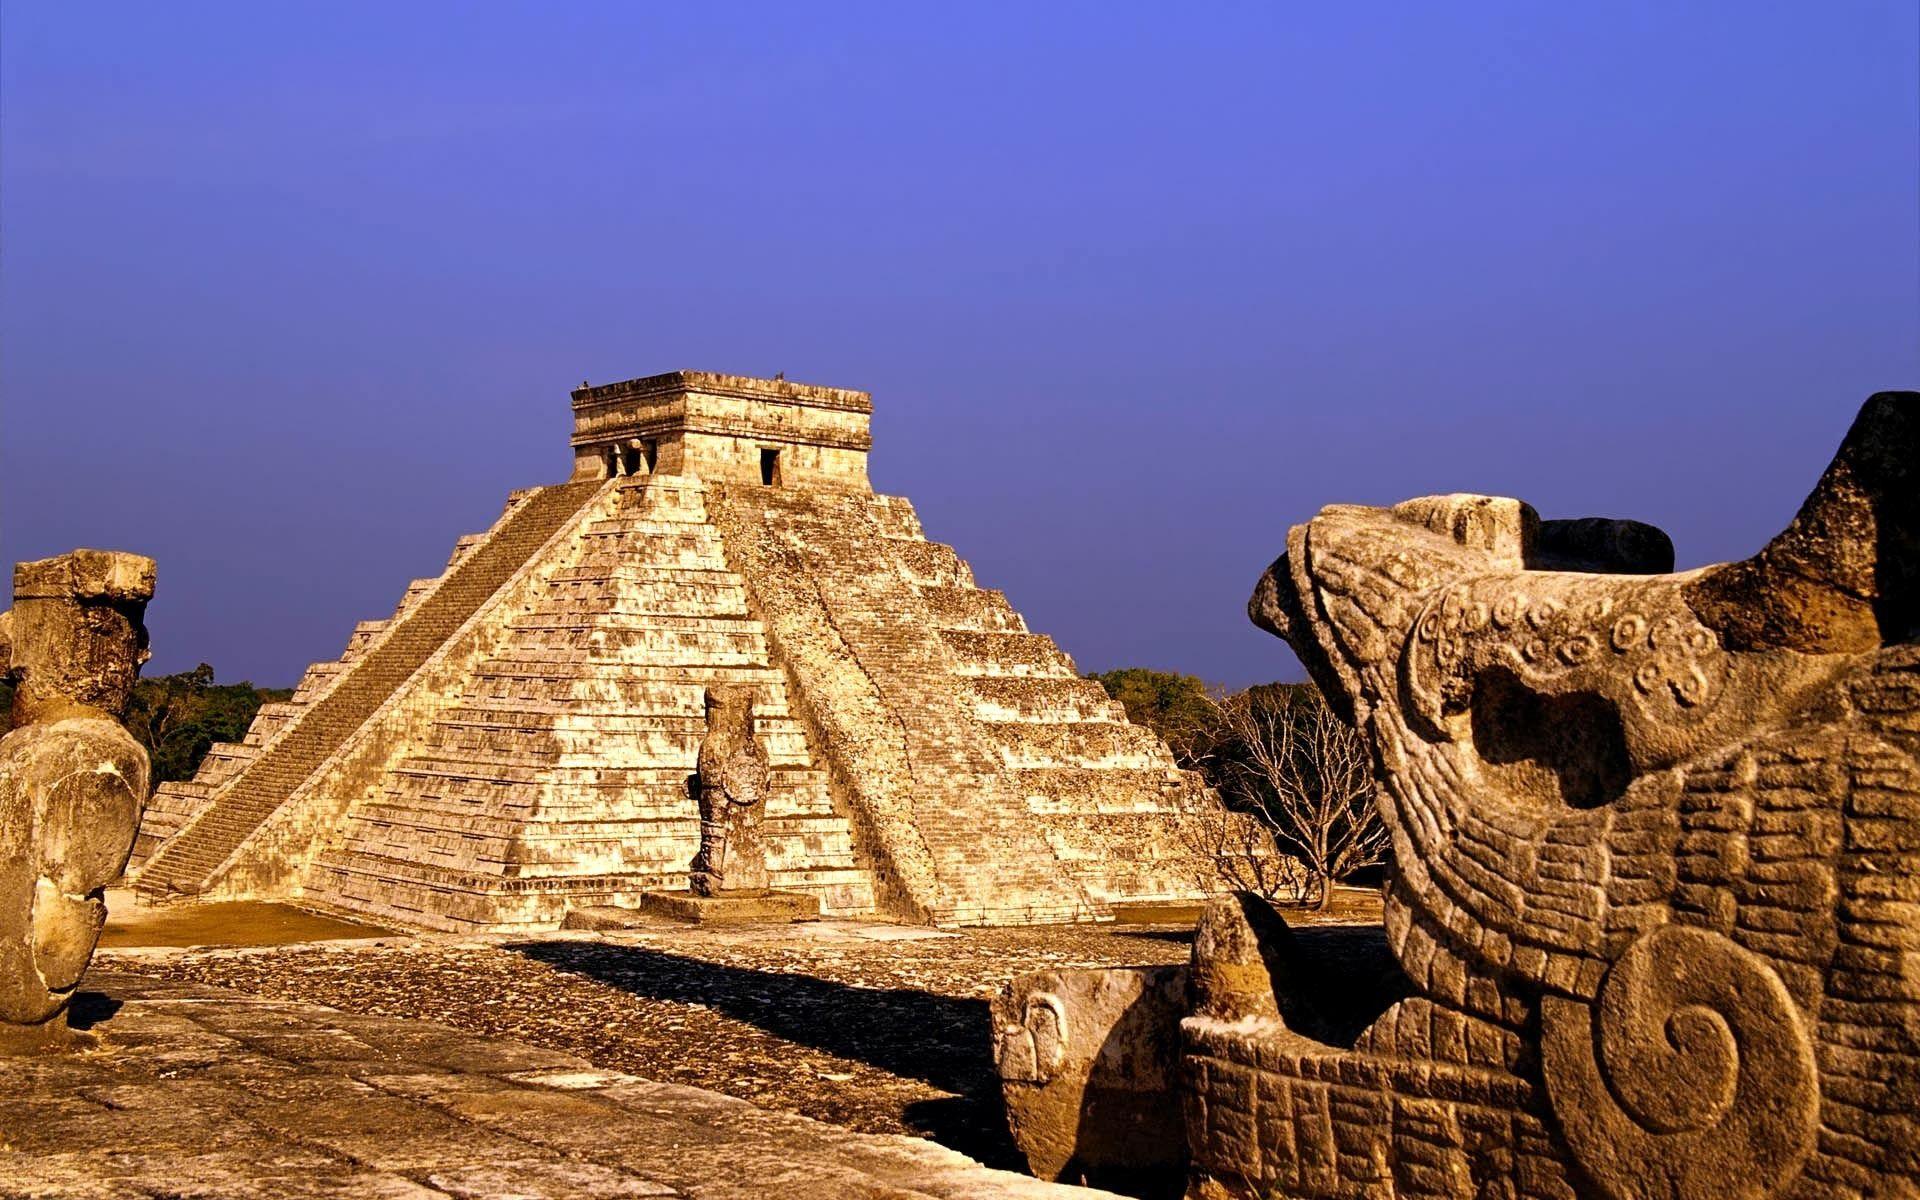 The ruins of Chichen Itza are located in the northern center